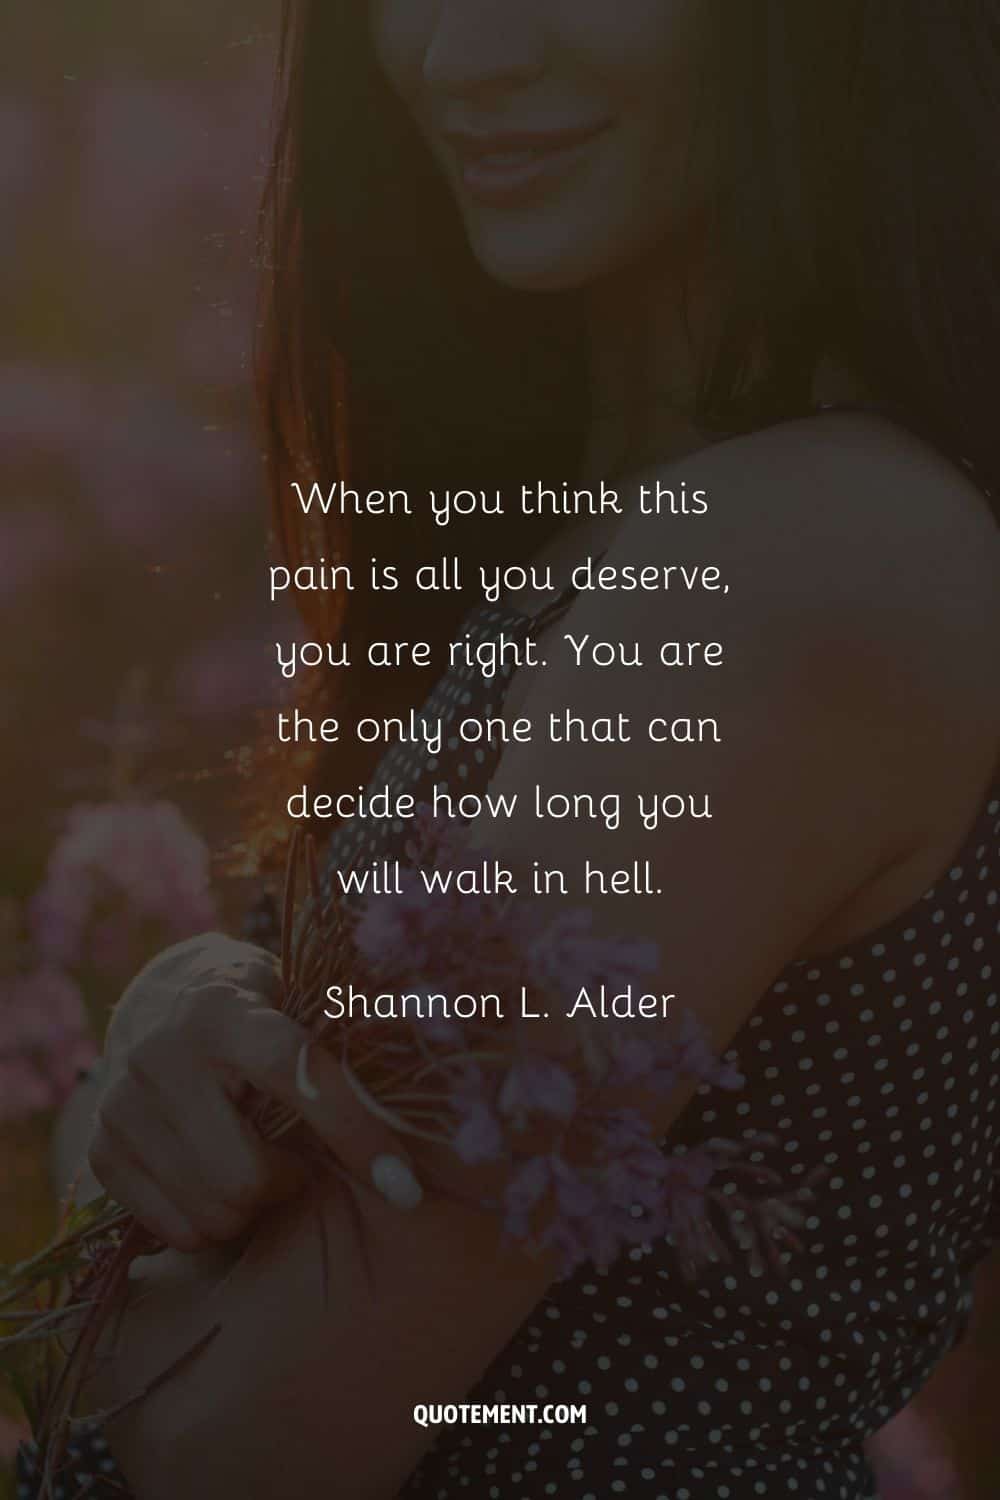 “When you think this pain is all you deserve, you are right. You are the only one that can decide how long you will walk in hell.” ― Shannon L. Alder